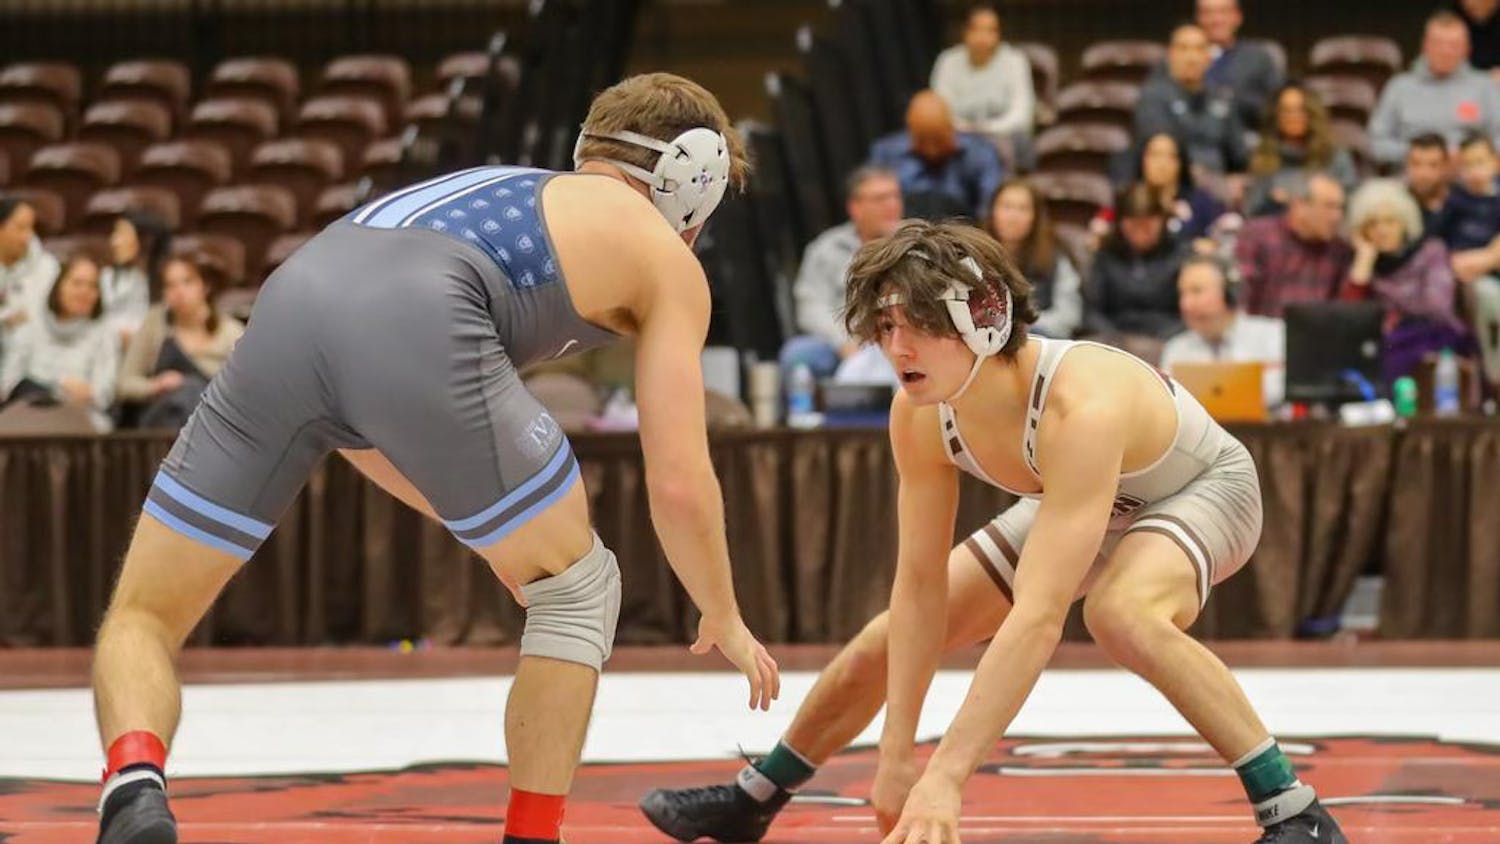 Xiang_wrestling_CO_Chip DeLorenzo via Brown Athletics.png